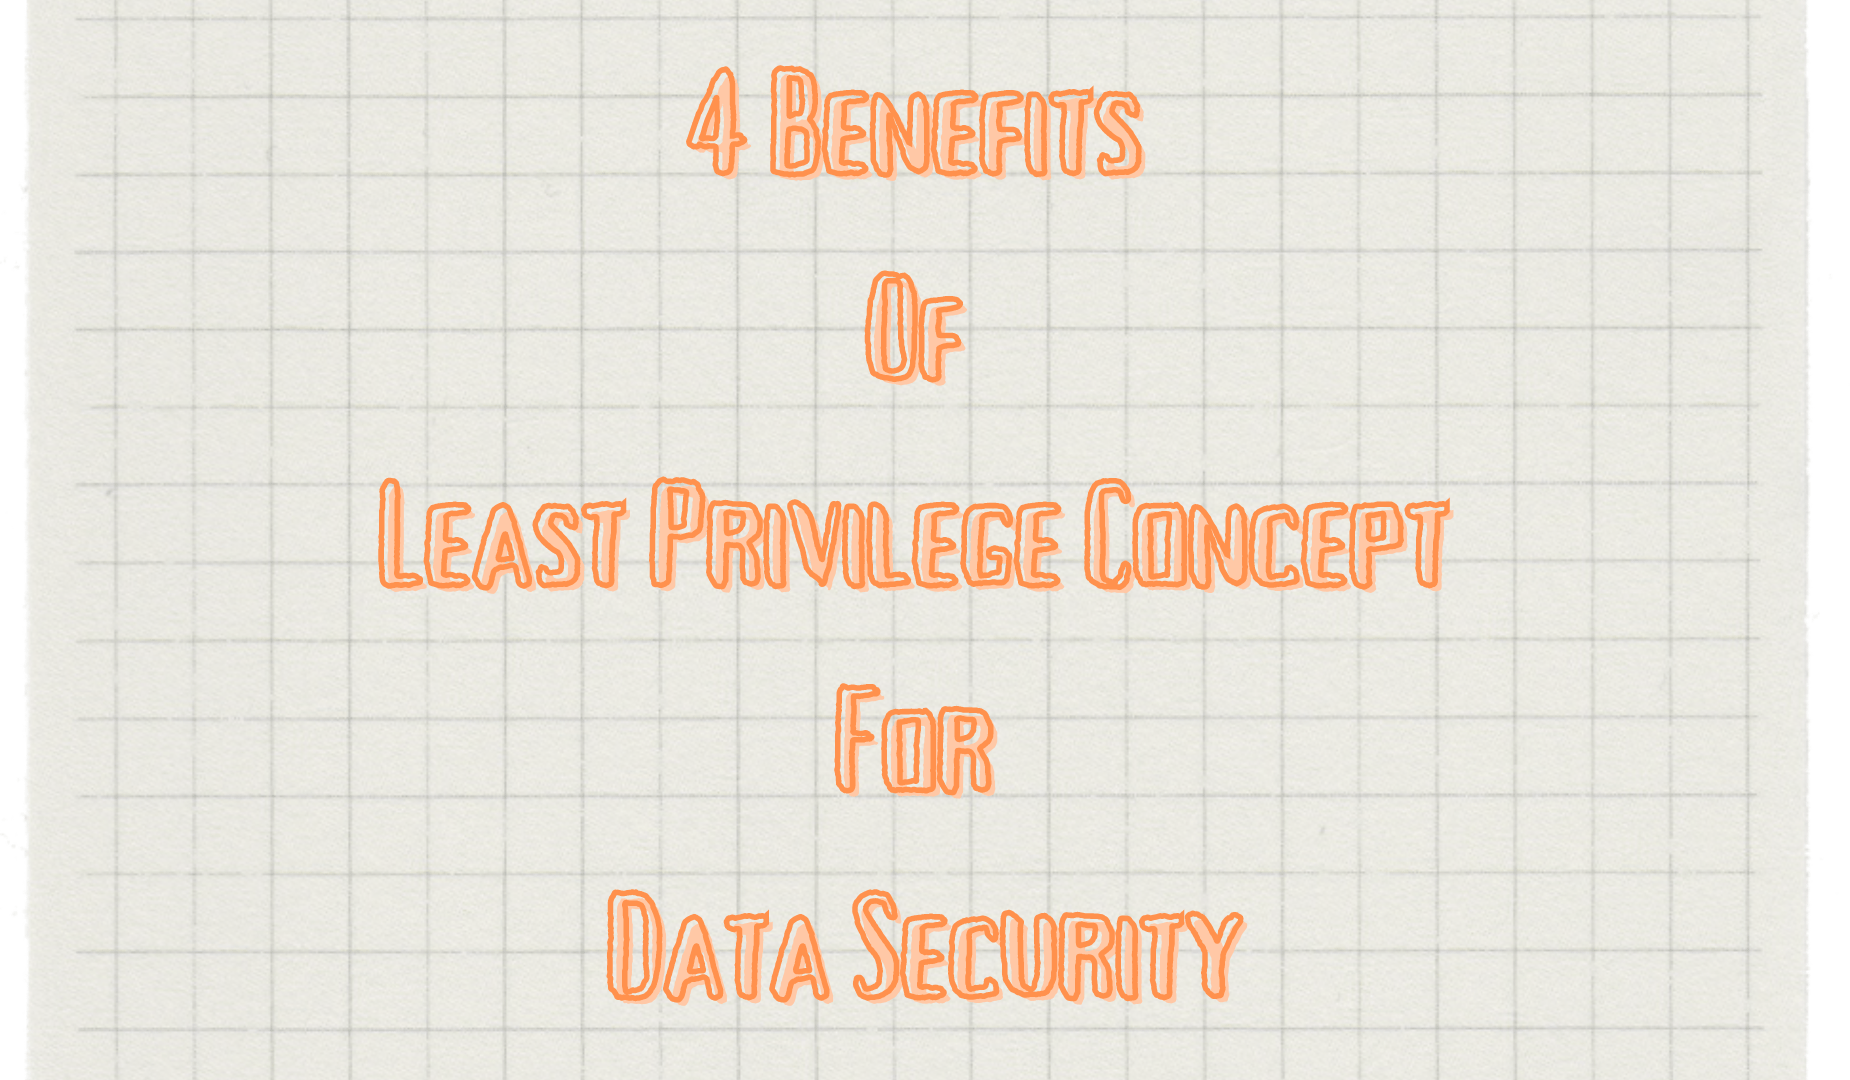 4 Benefits of Least Privilege Concept For Data Security